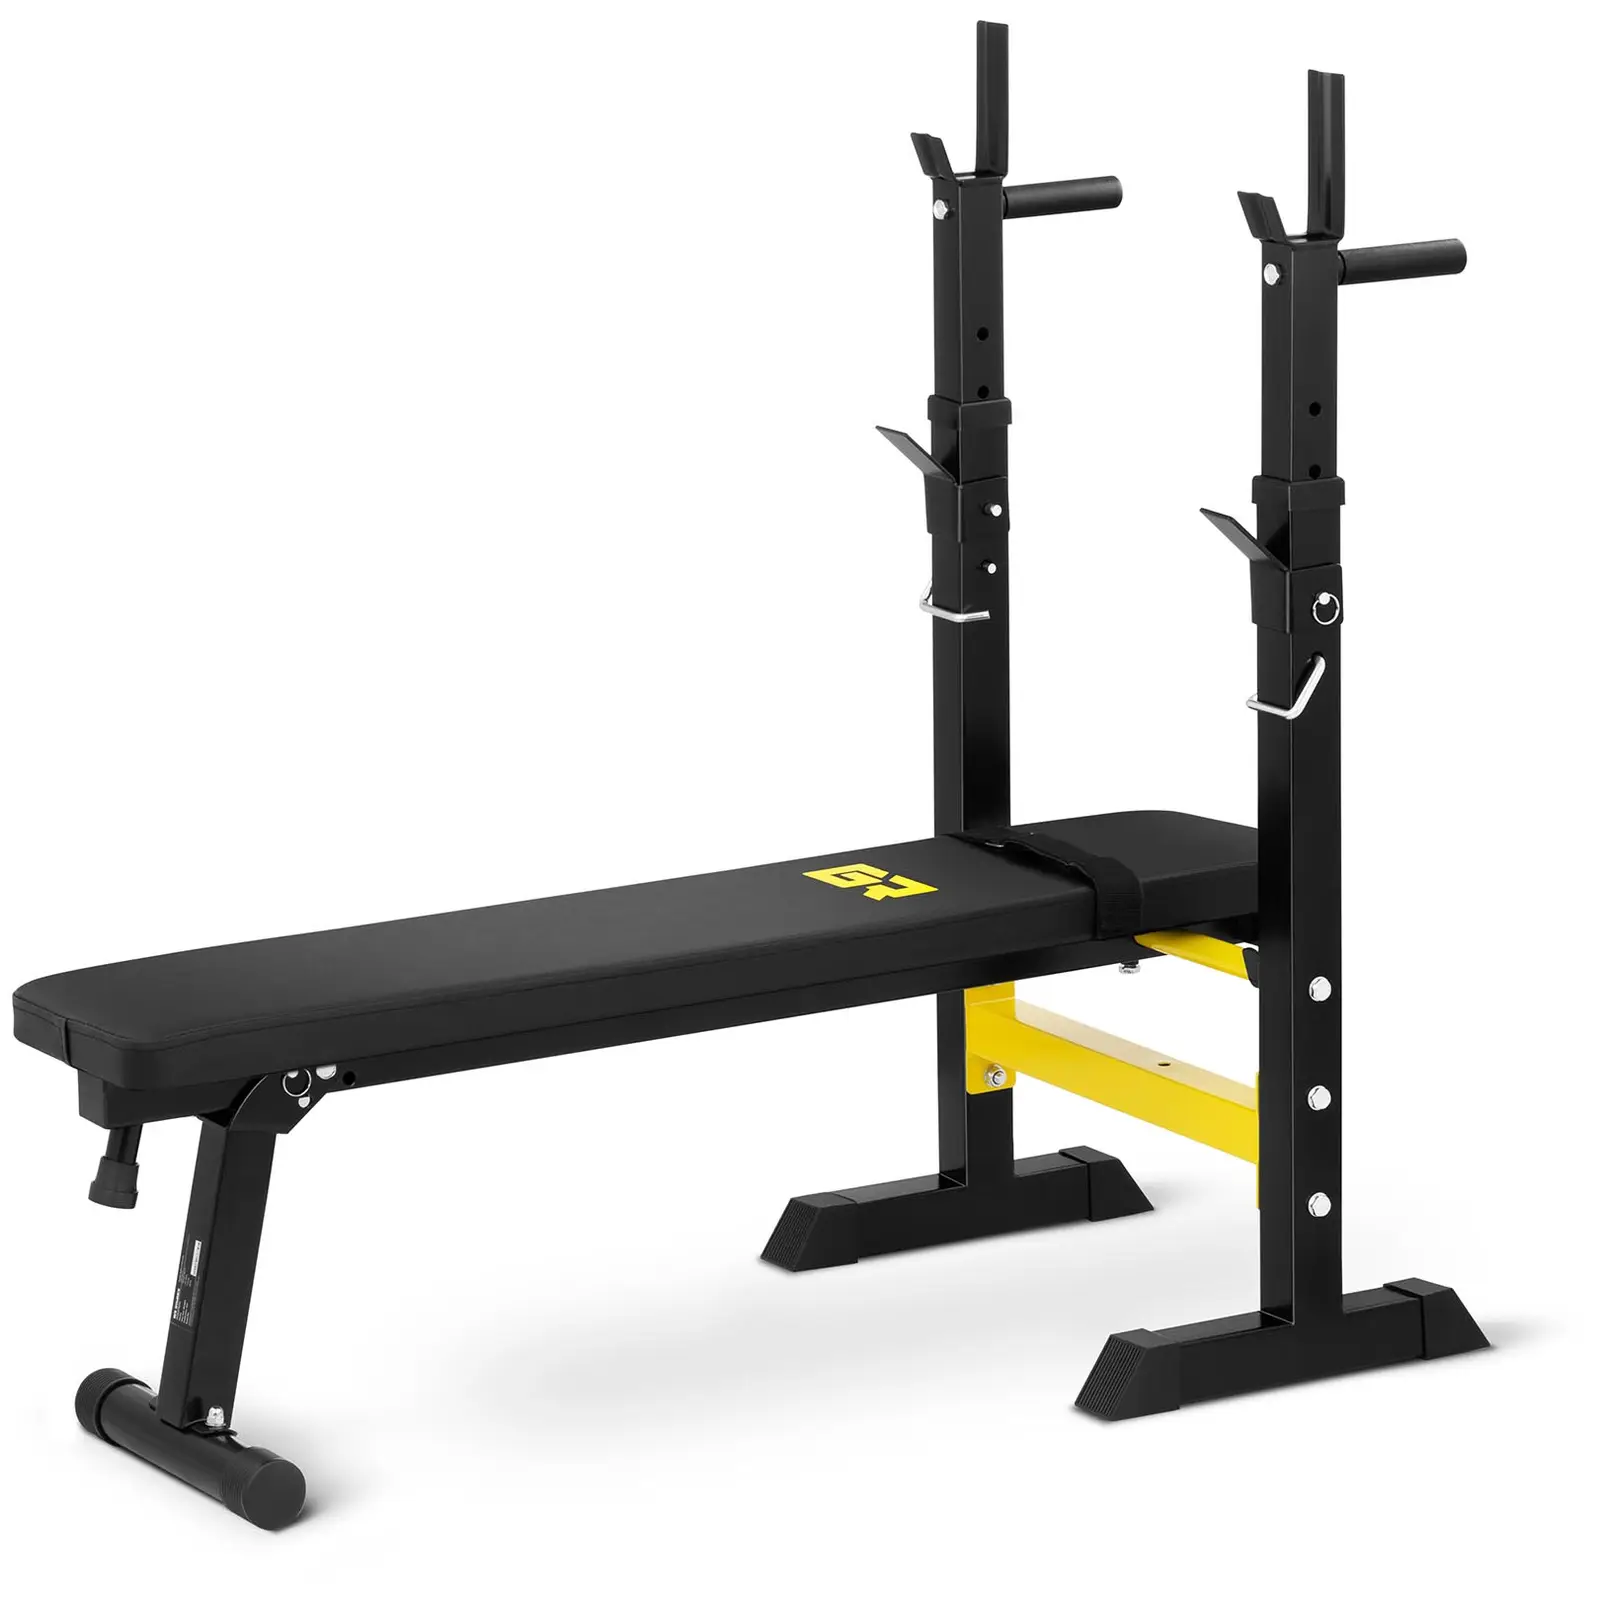 Bench Press - with rack and dip station